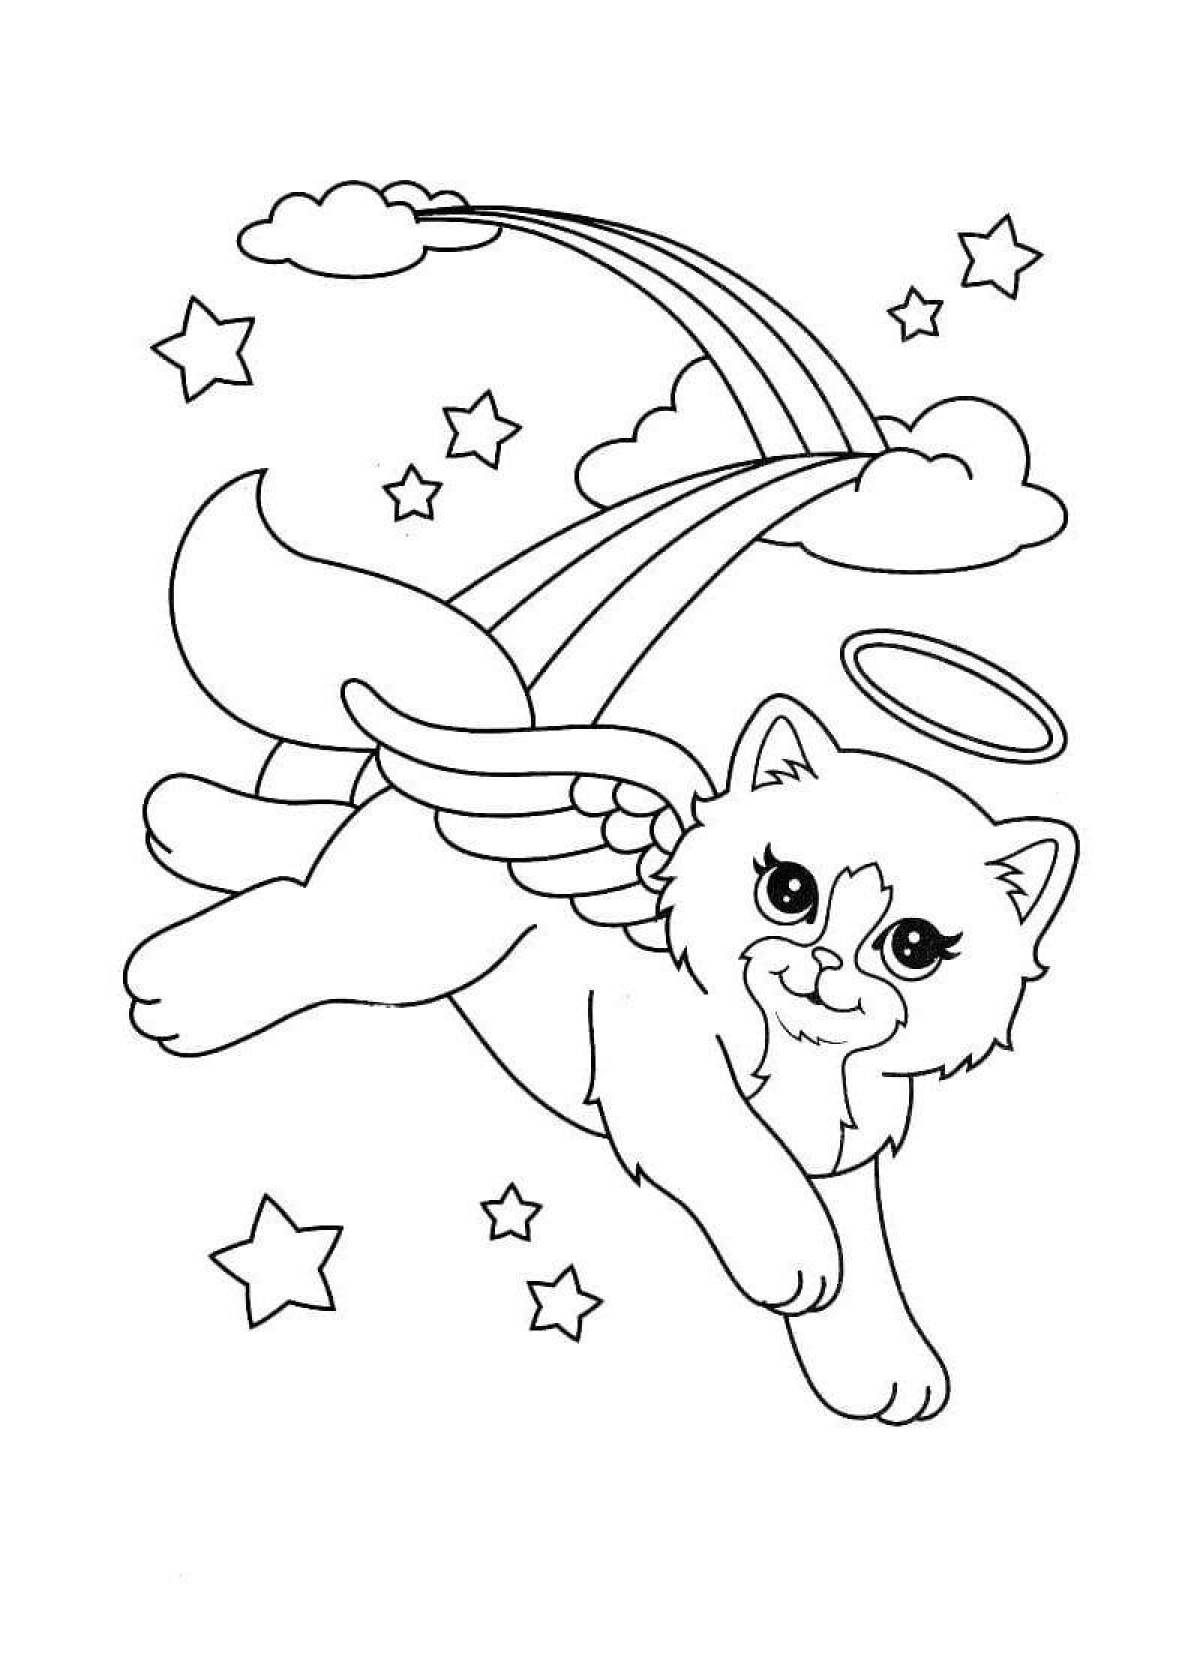 Charming kitty coloring book